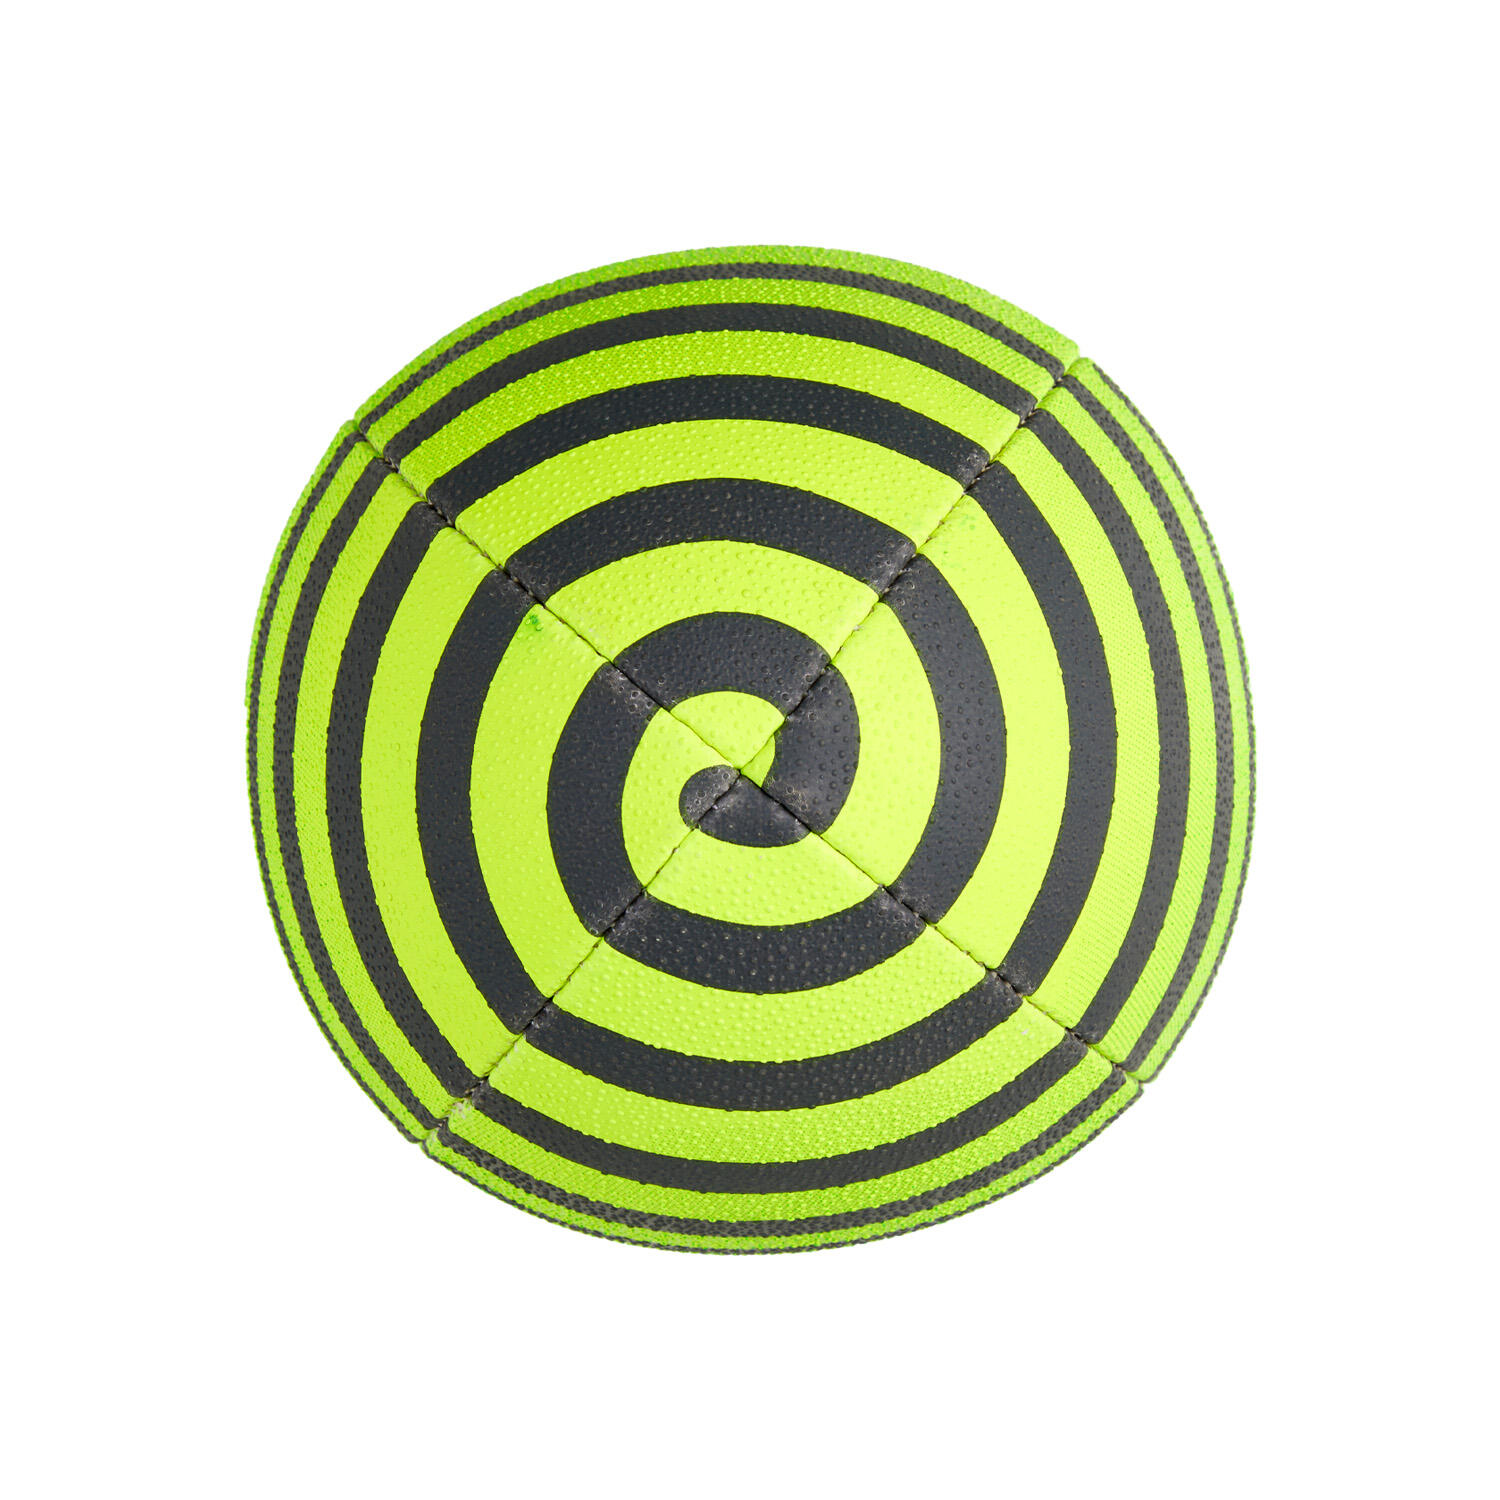 Ram Rugby Ball - Squad - Trainer - (Size 5) - Spiral 4/6